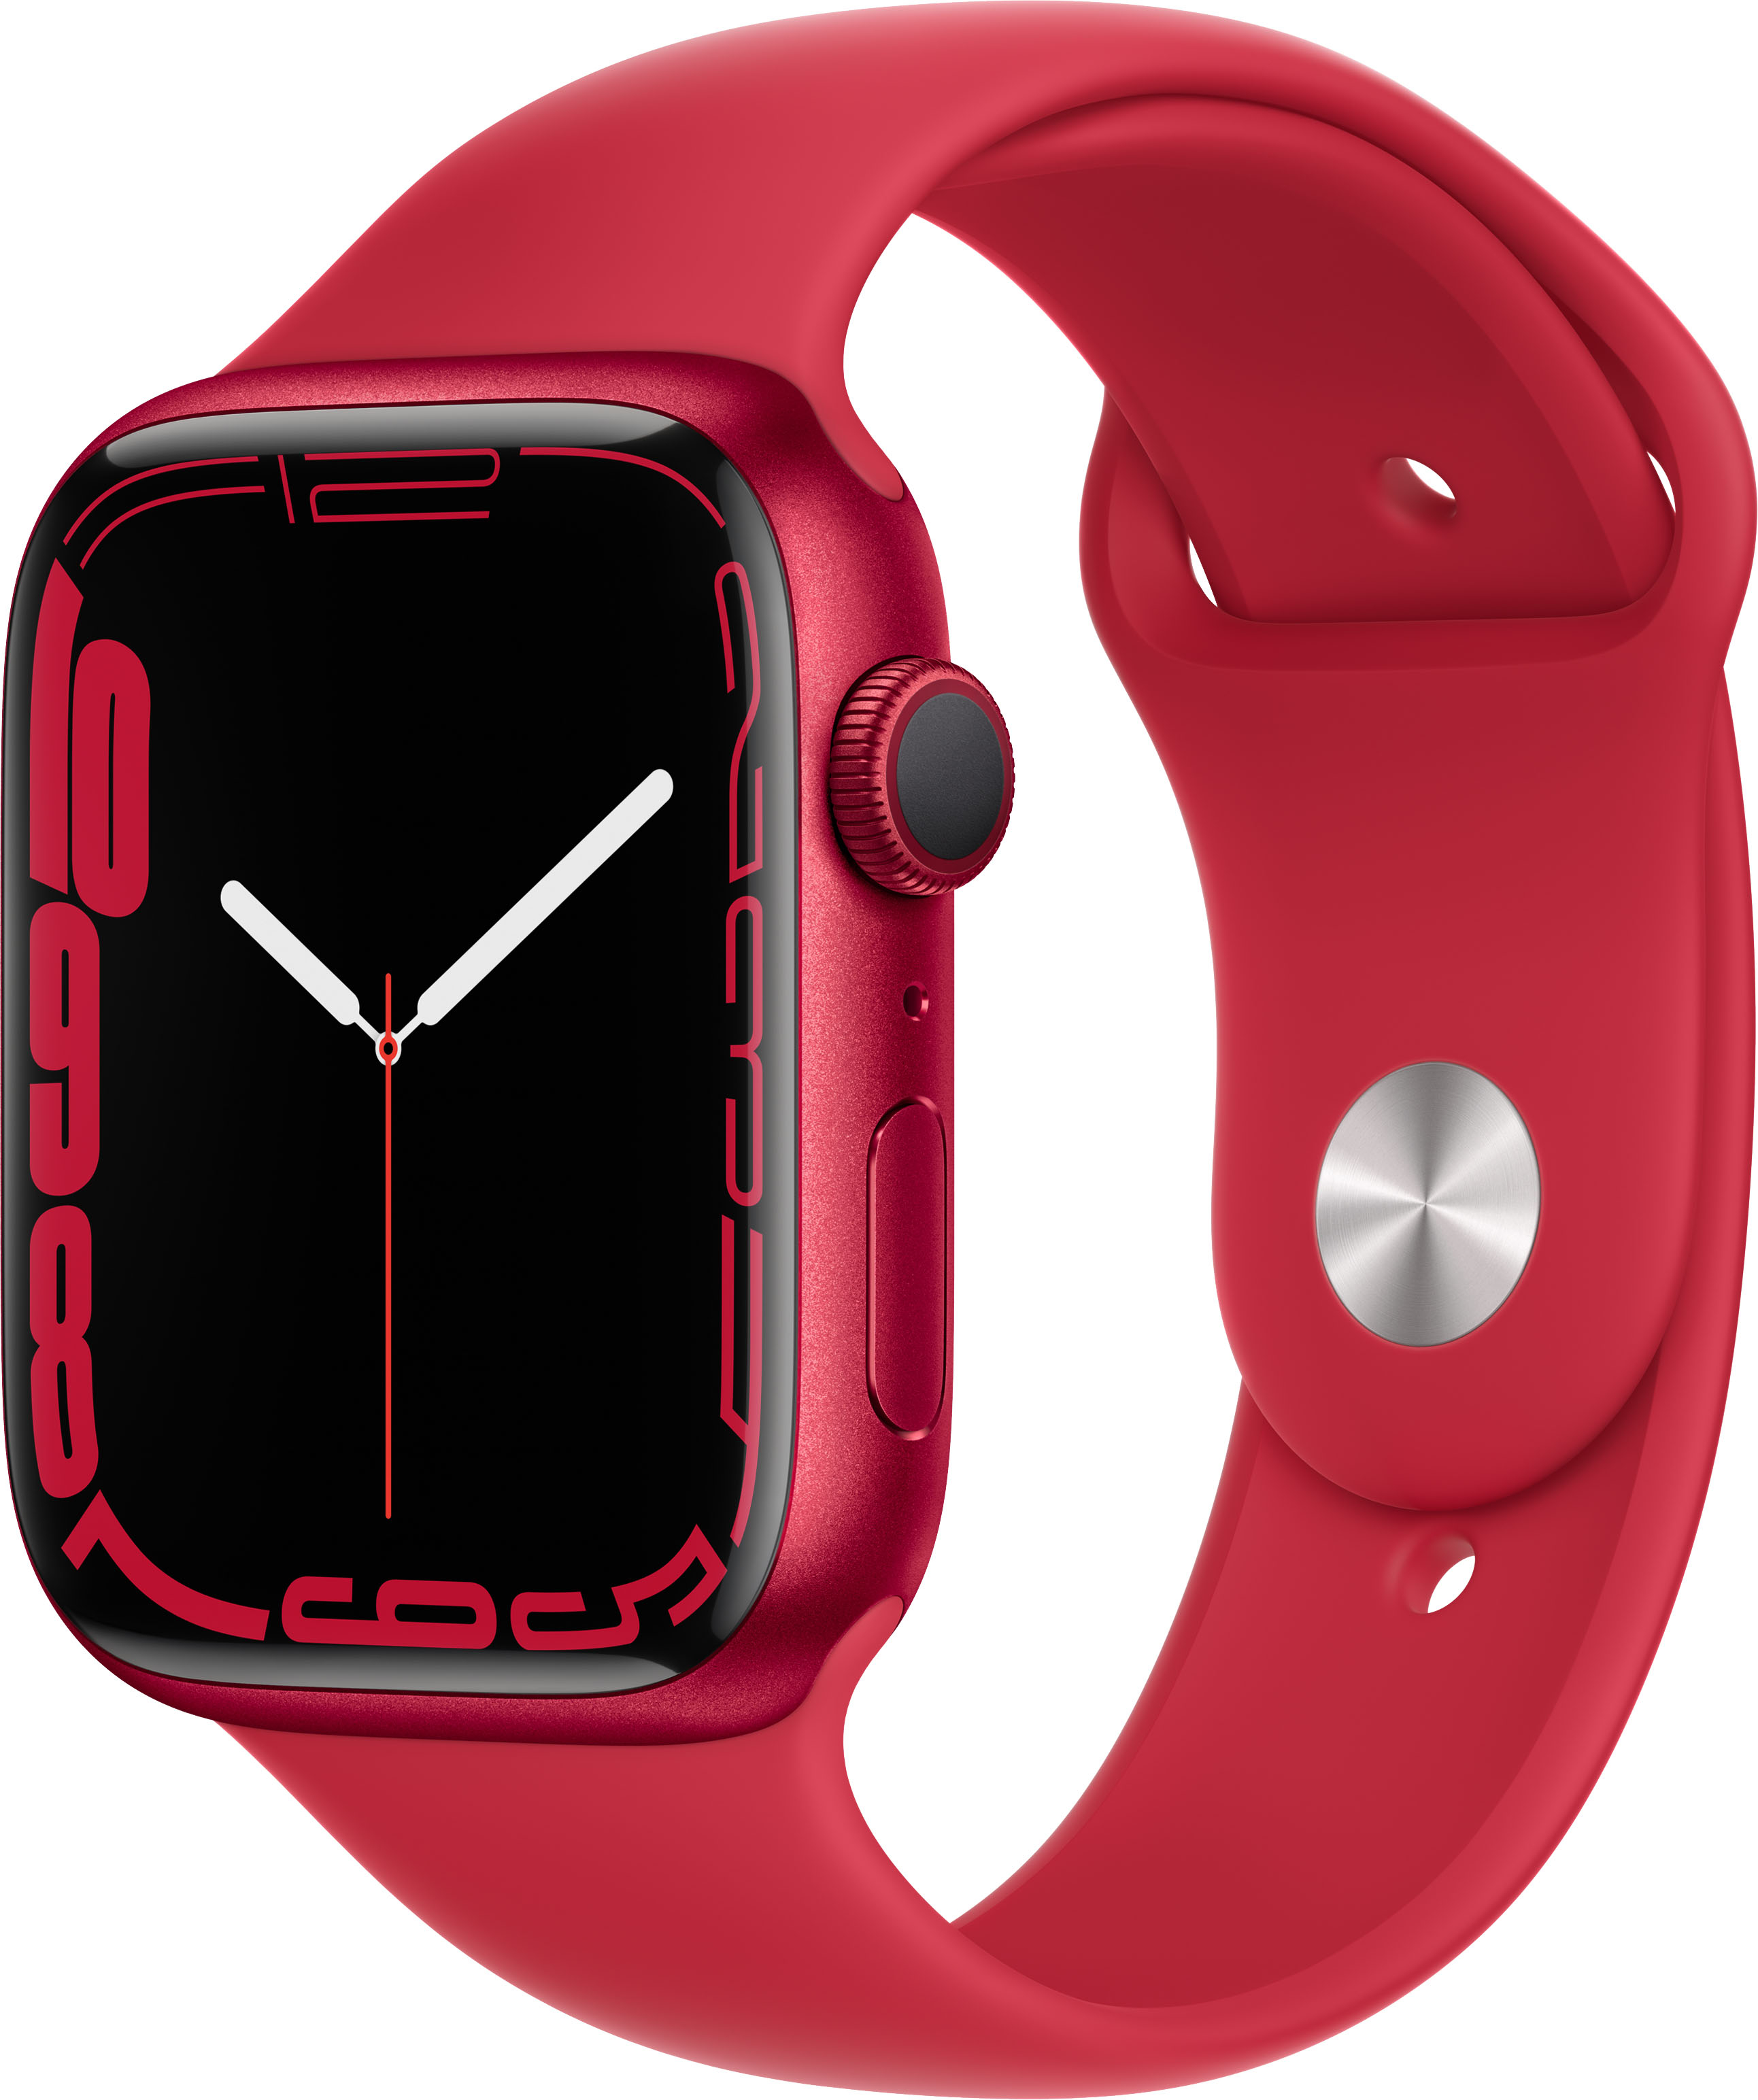 Apple Watch Series 7 (GPS) 41mm (PRODUCT)RED Aluminum Case with (PRODUCT)RED Sport Band - PRODUCT(RED)